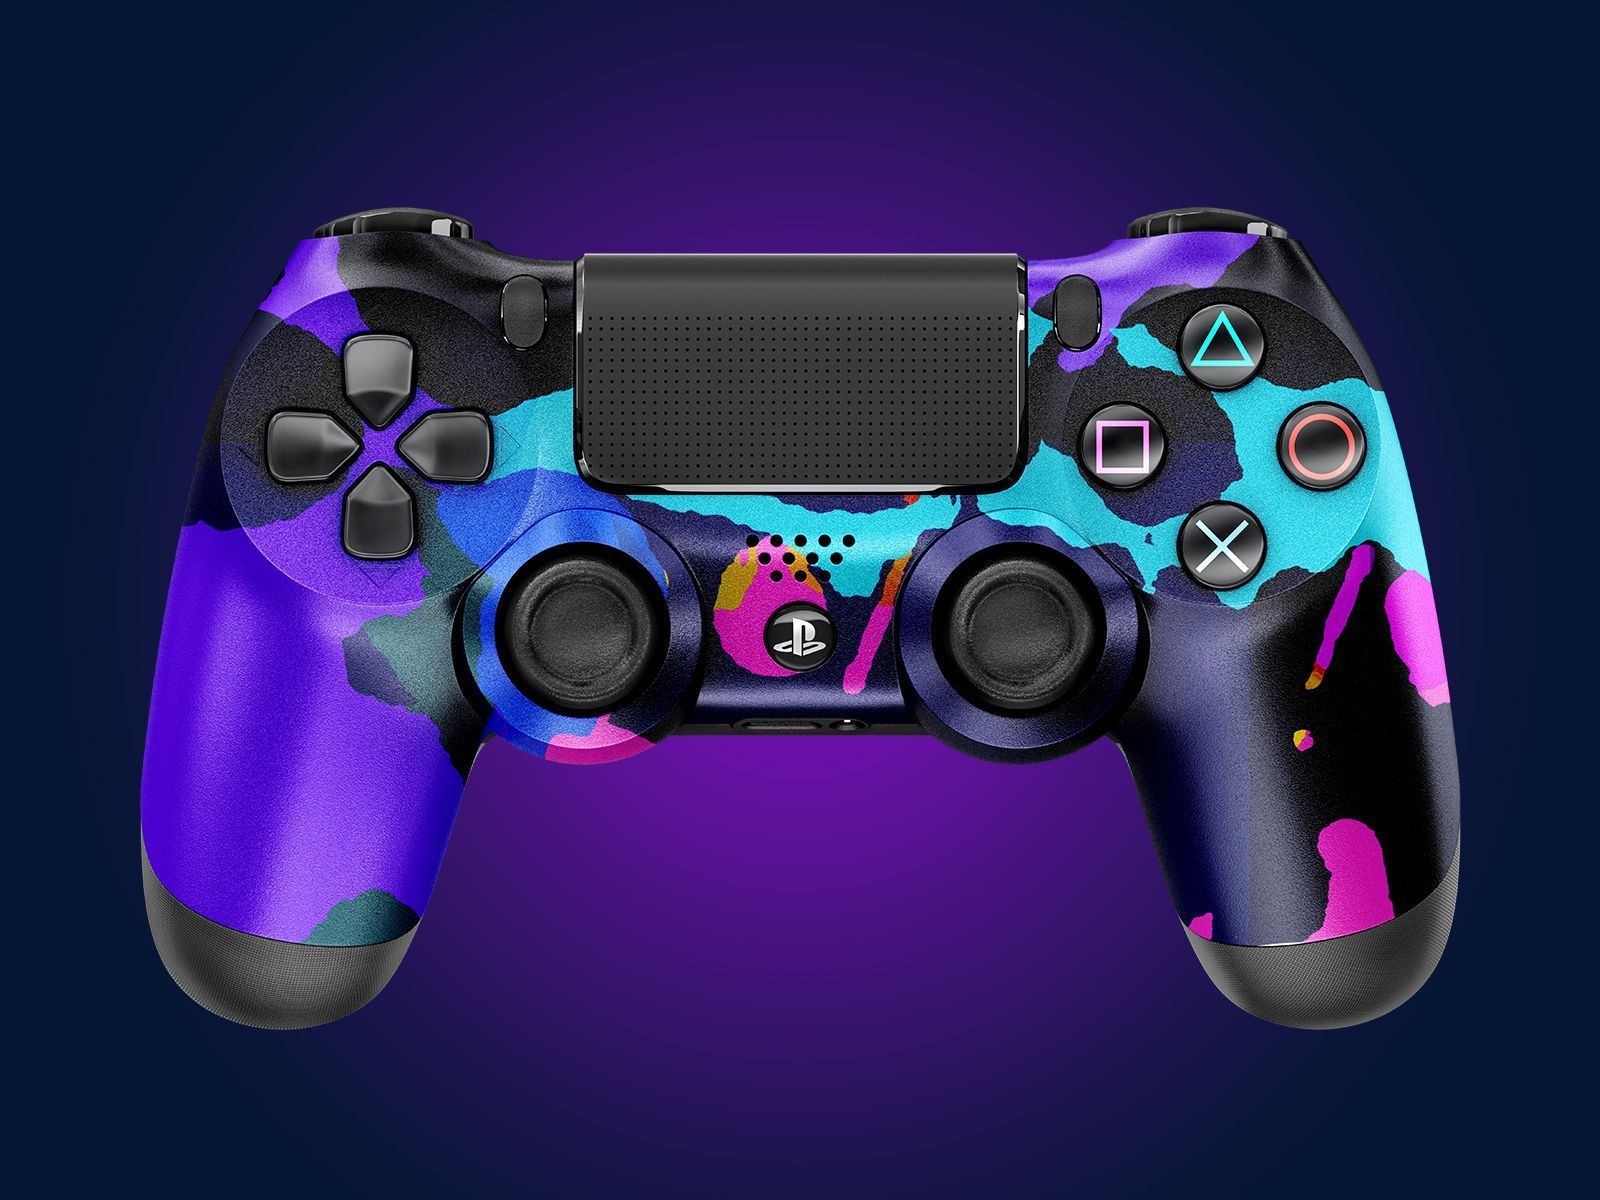 Mix It Up. Ps4 controller, Snowboard design, Ps4